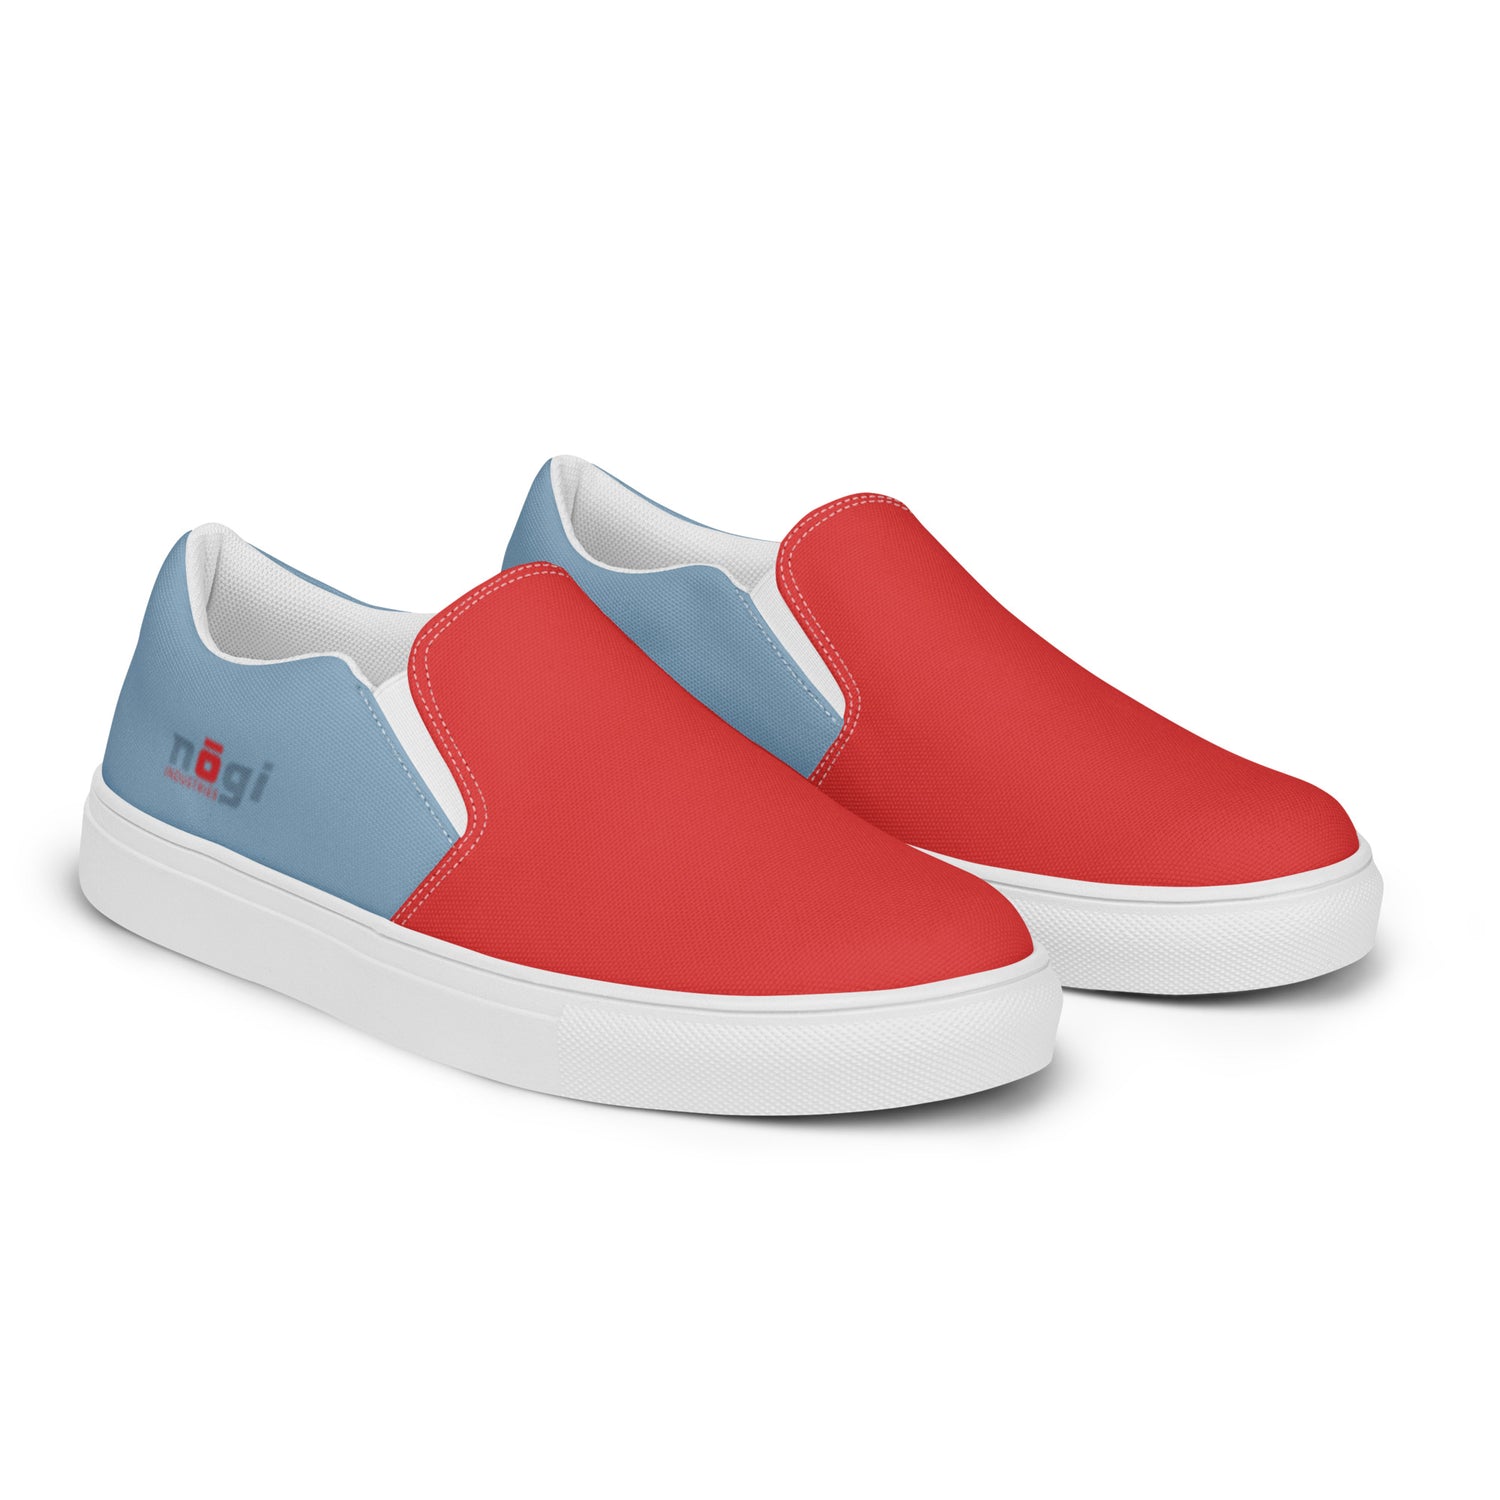 Blue Lines Men’s Slip-On Canvas Shoes by Nogi Industries